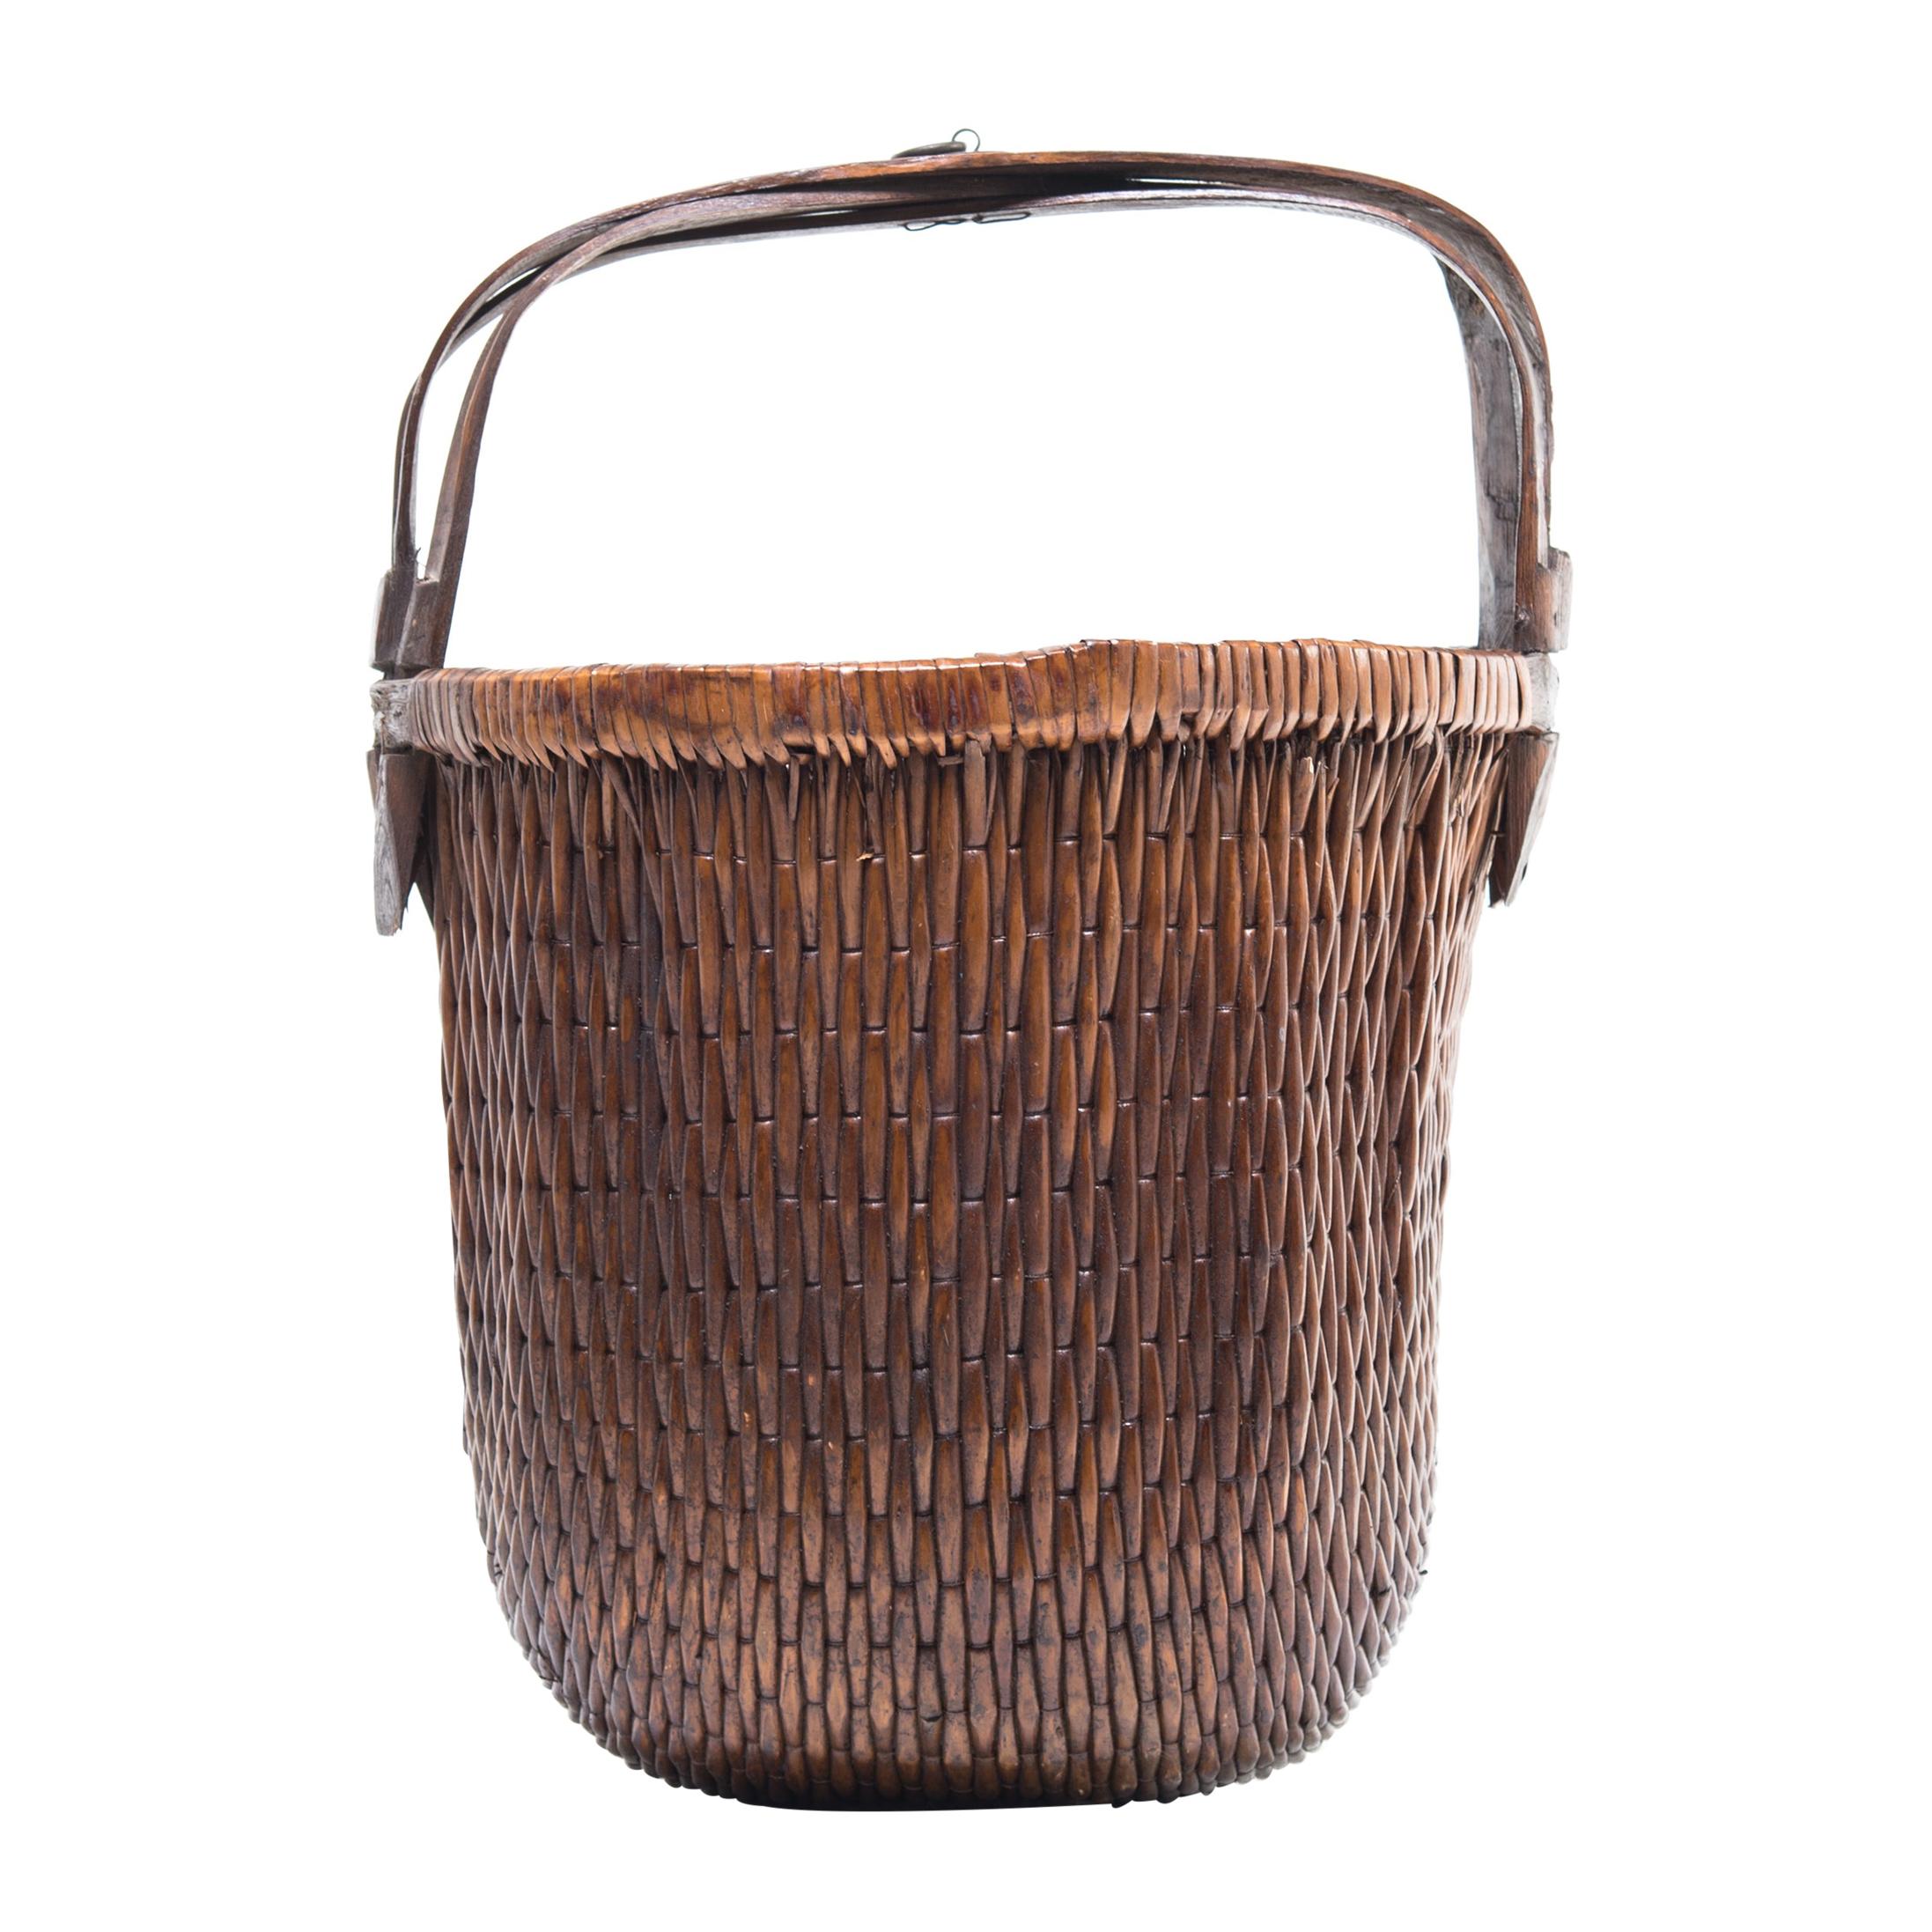 Early 20th Century Chinese Bent Handle Willow Basket